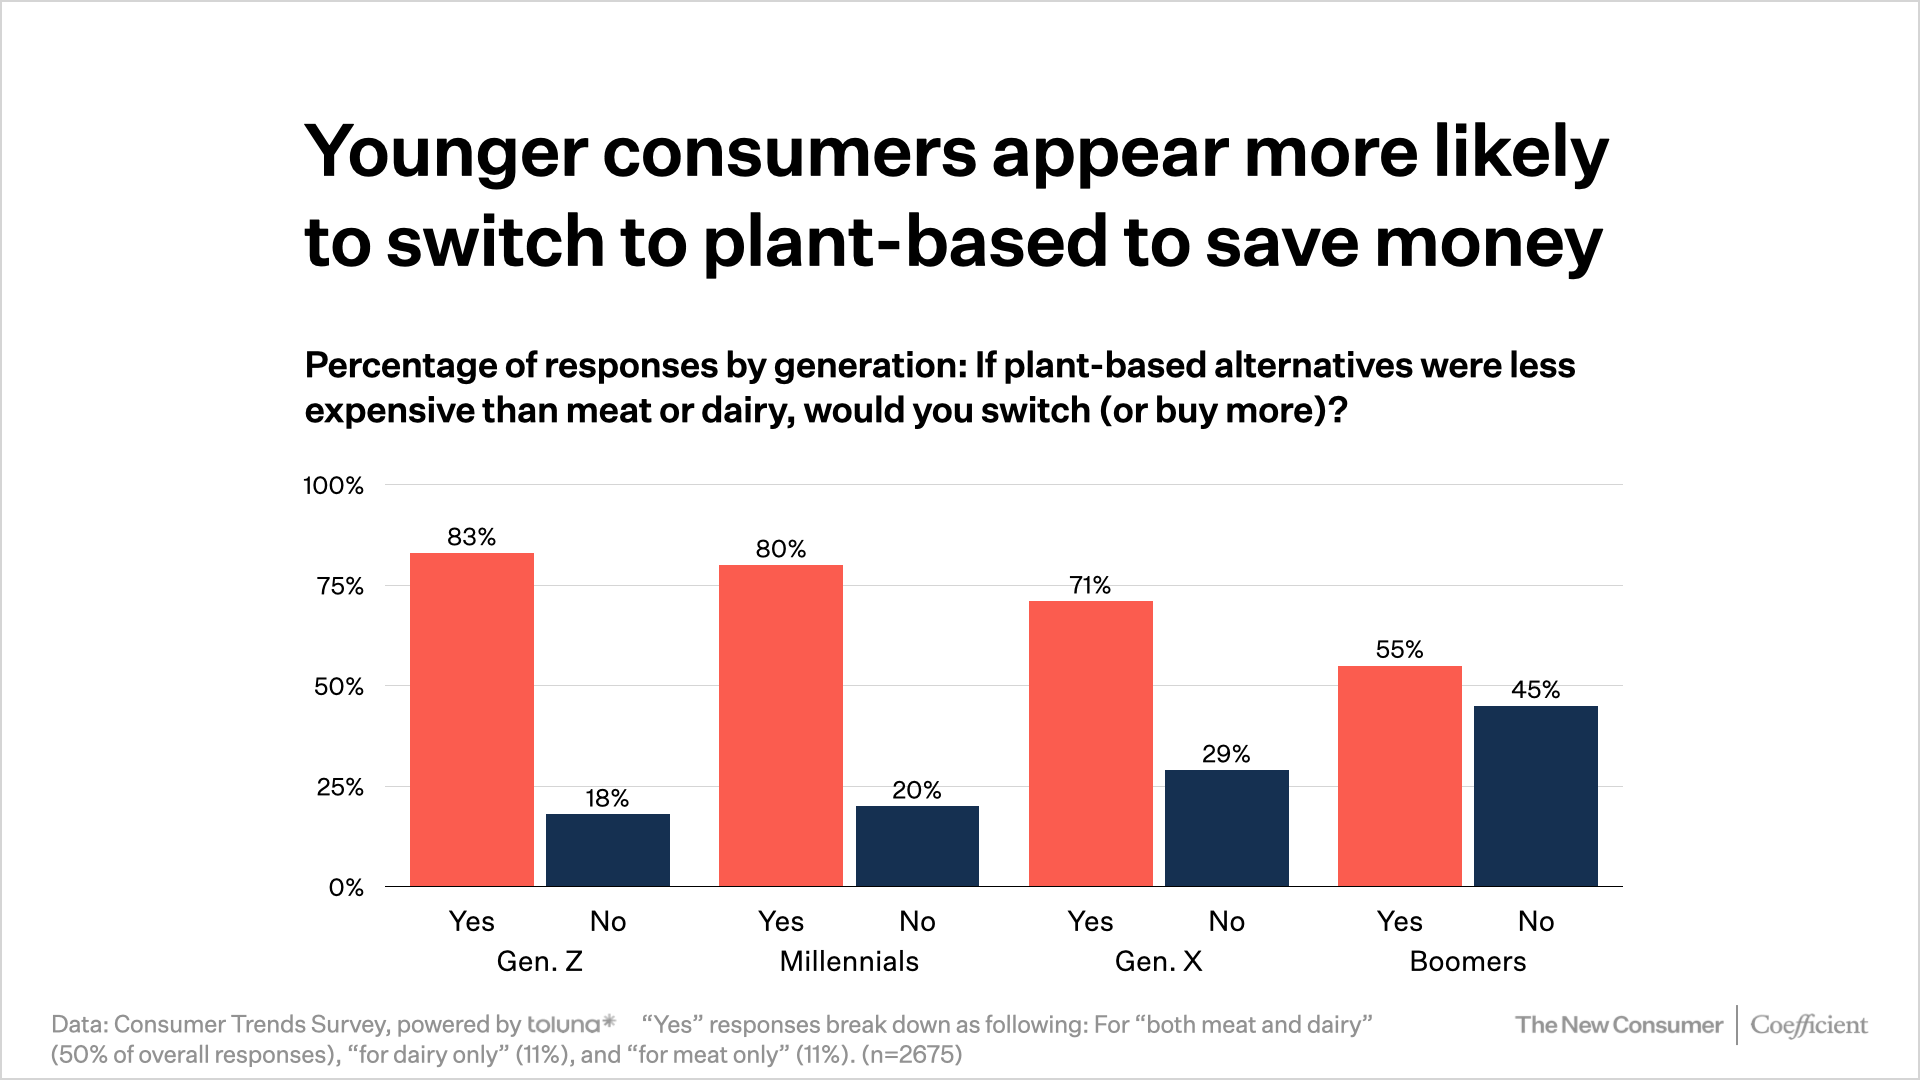 Younger consumers appear more likely to switch to plant-based to save money